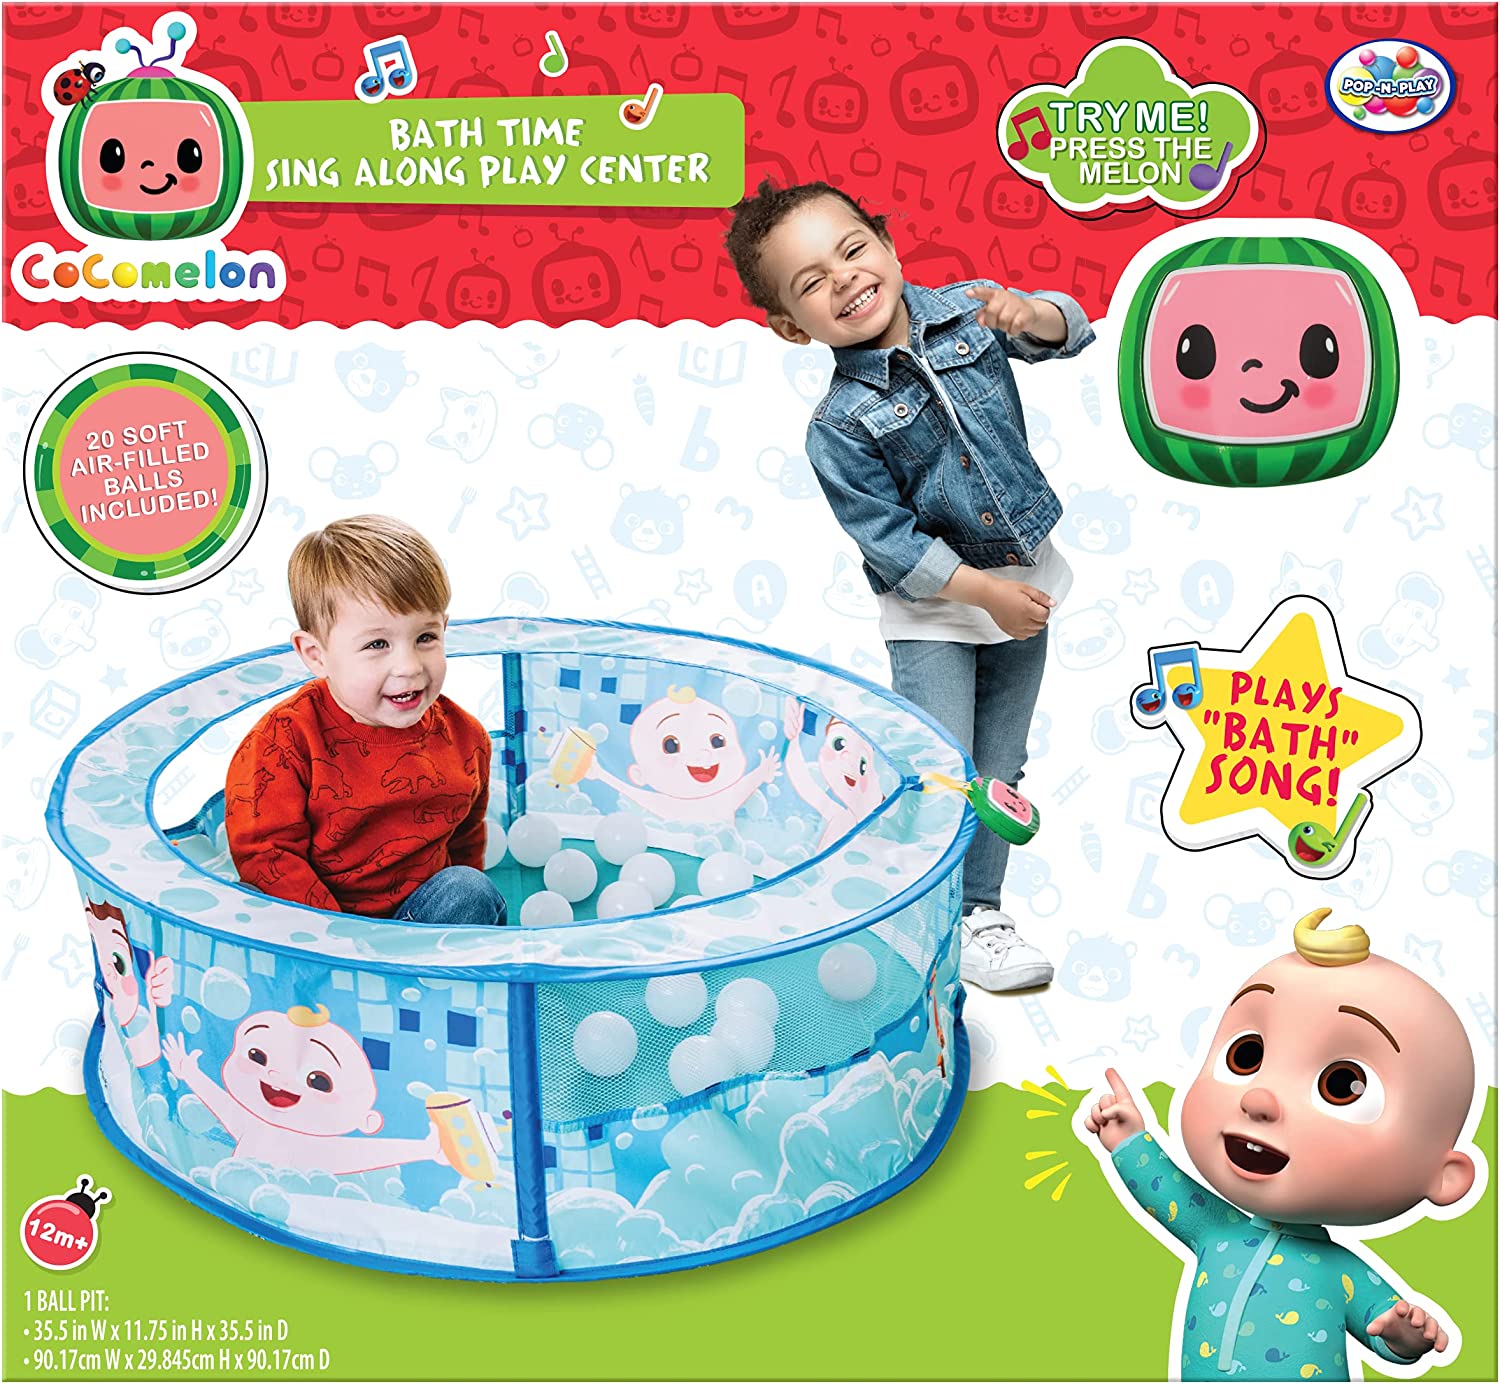 CoComelon Bath Time Sing Along Musical Ball Pit w/ 20 Play Balls $10.60 + FS w/ Amazon Prime or FS on $25+